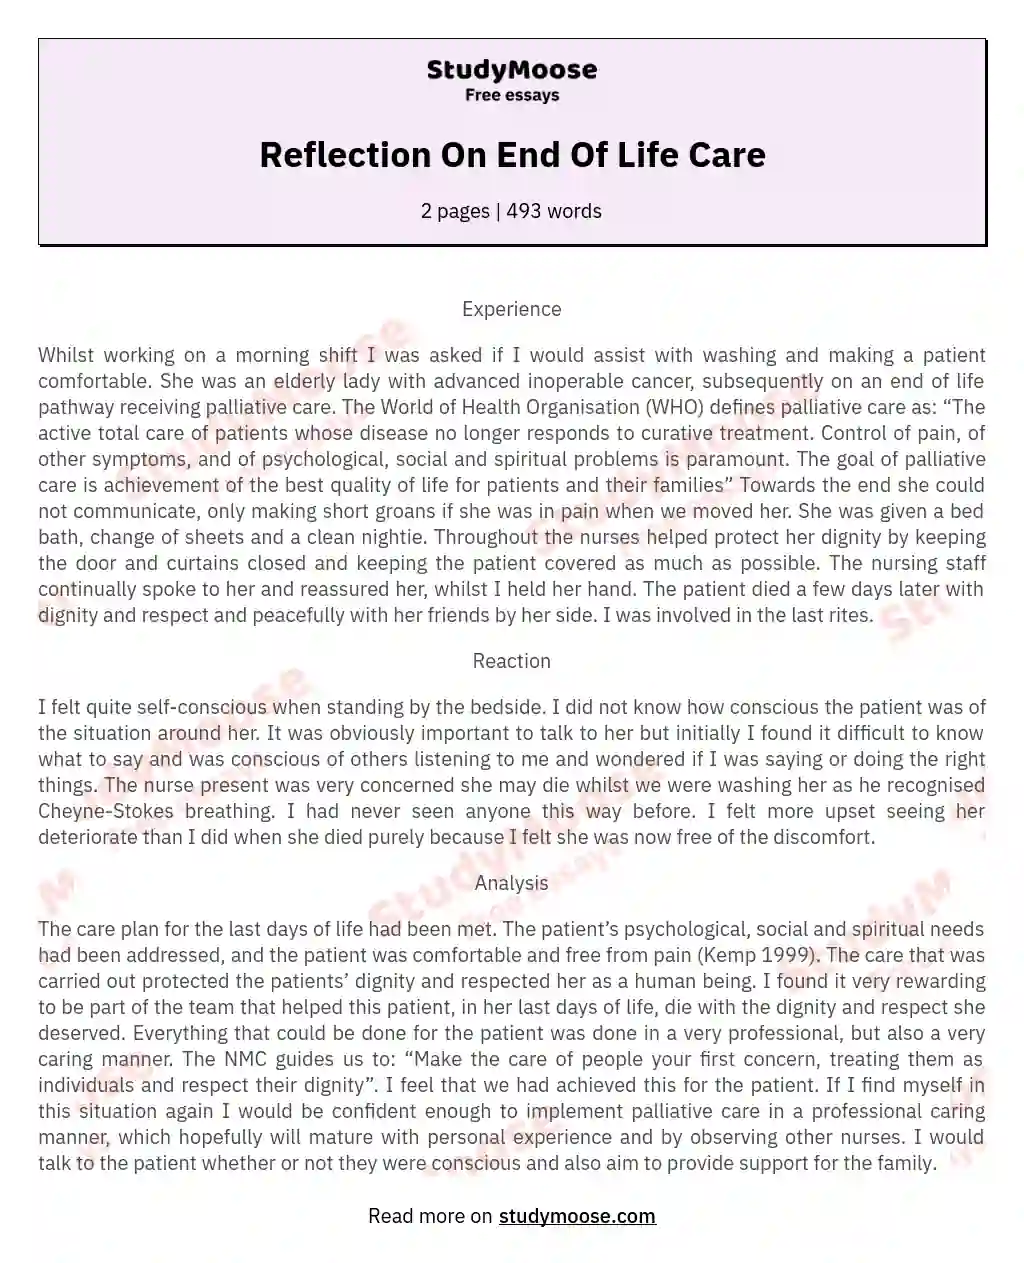 Reflection On End Of Life Care essay